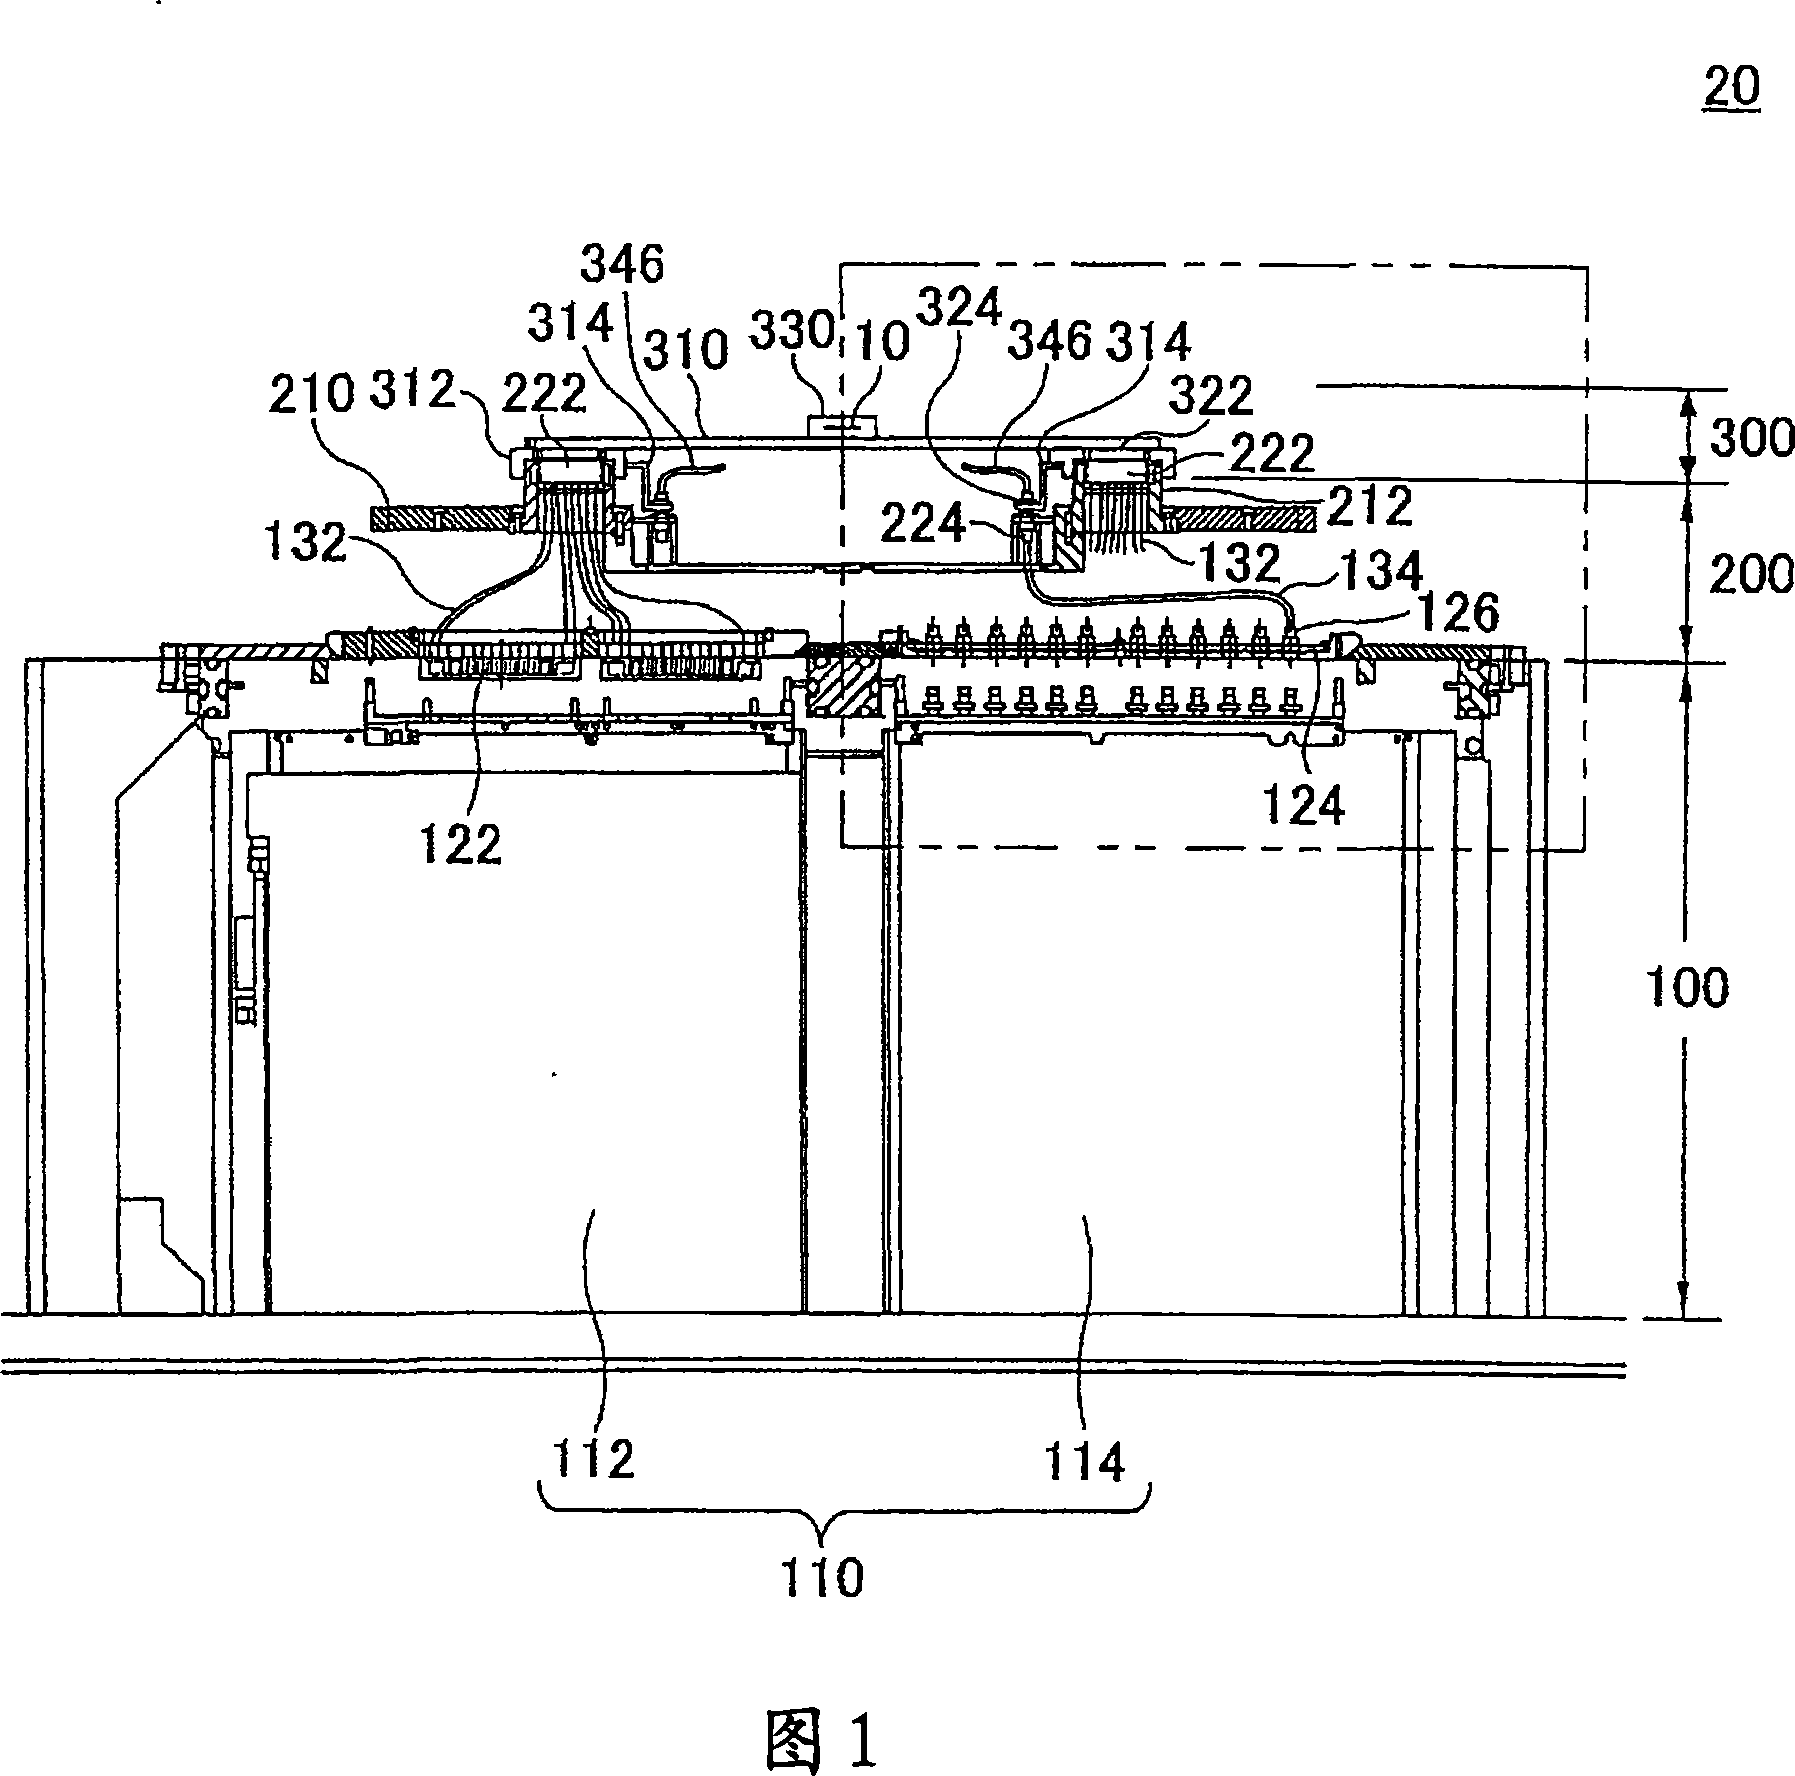 Semiconductor testing device, performance board and interface plate